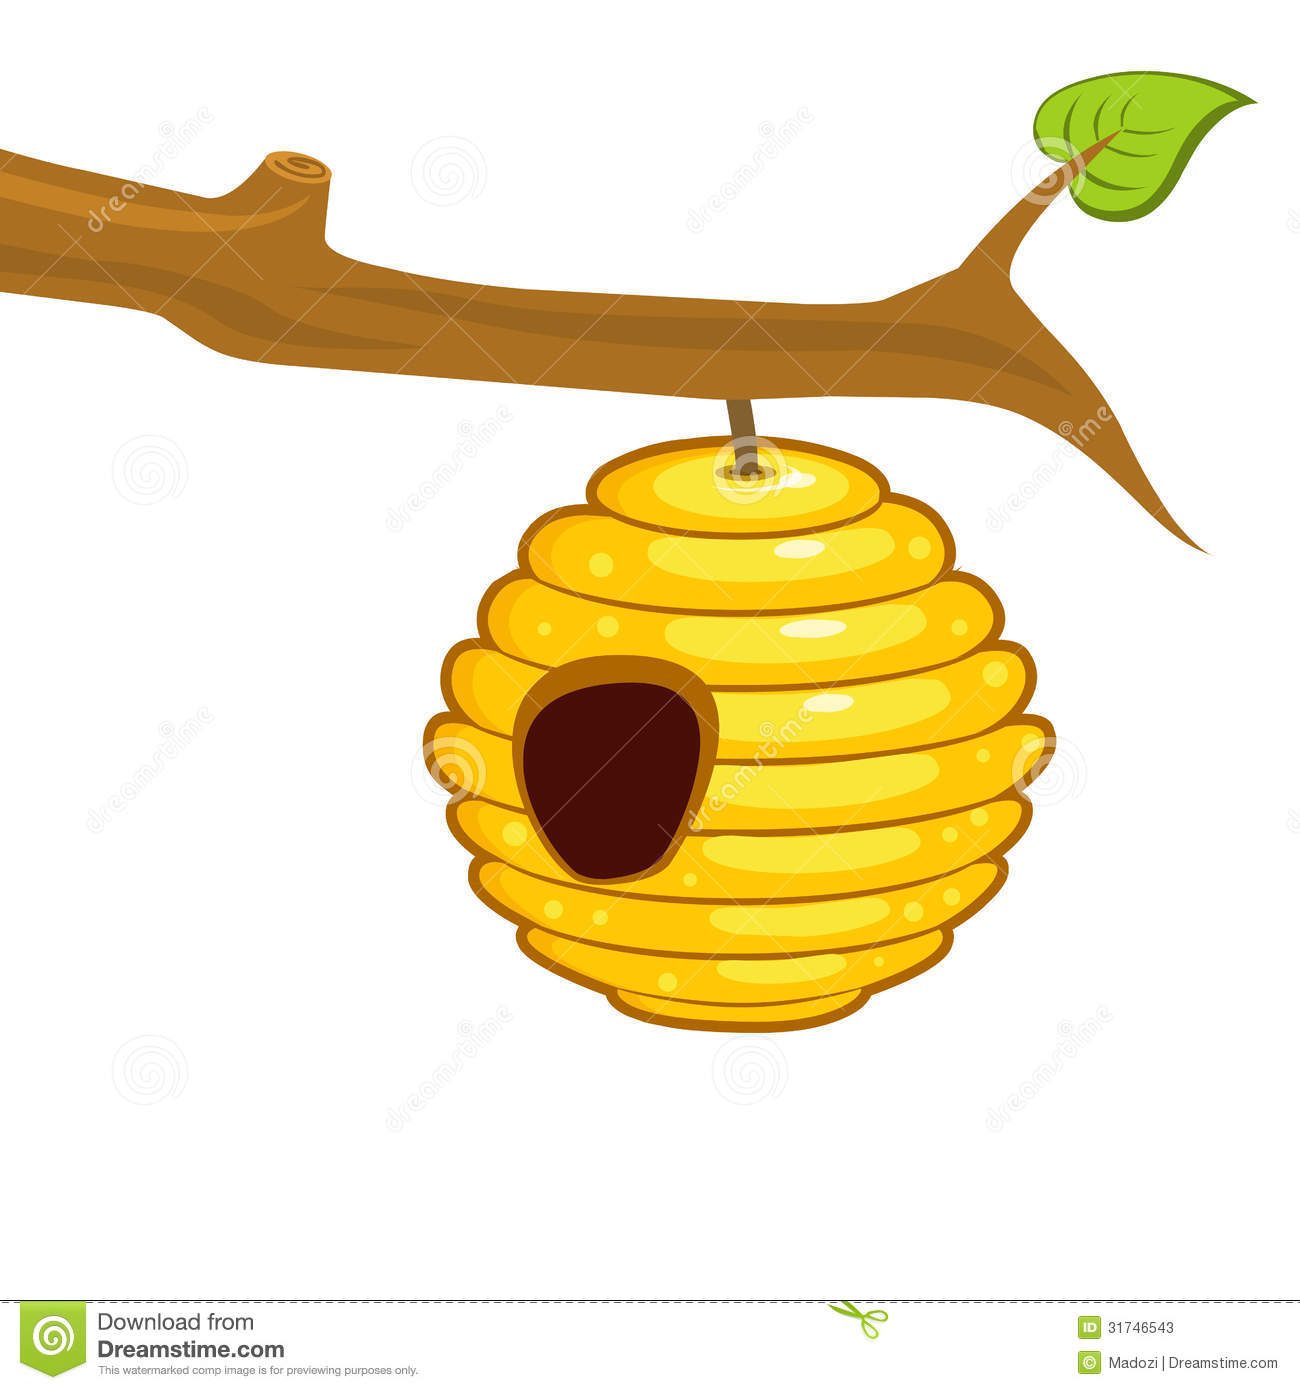 Beehive Hanging From A Branch Stock Photos   Image  31746543